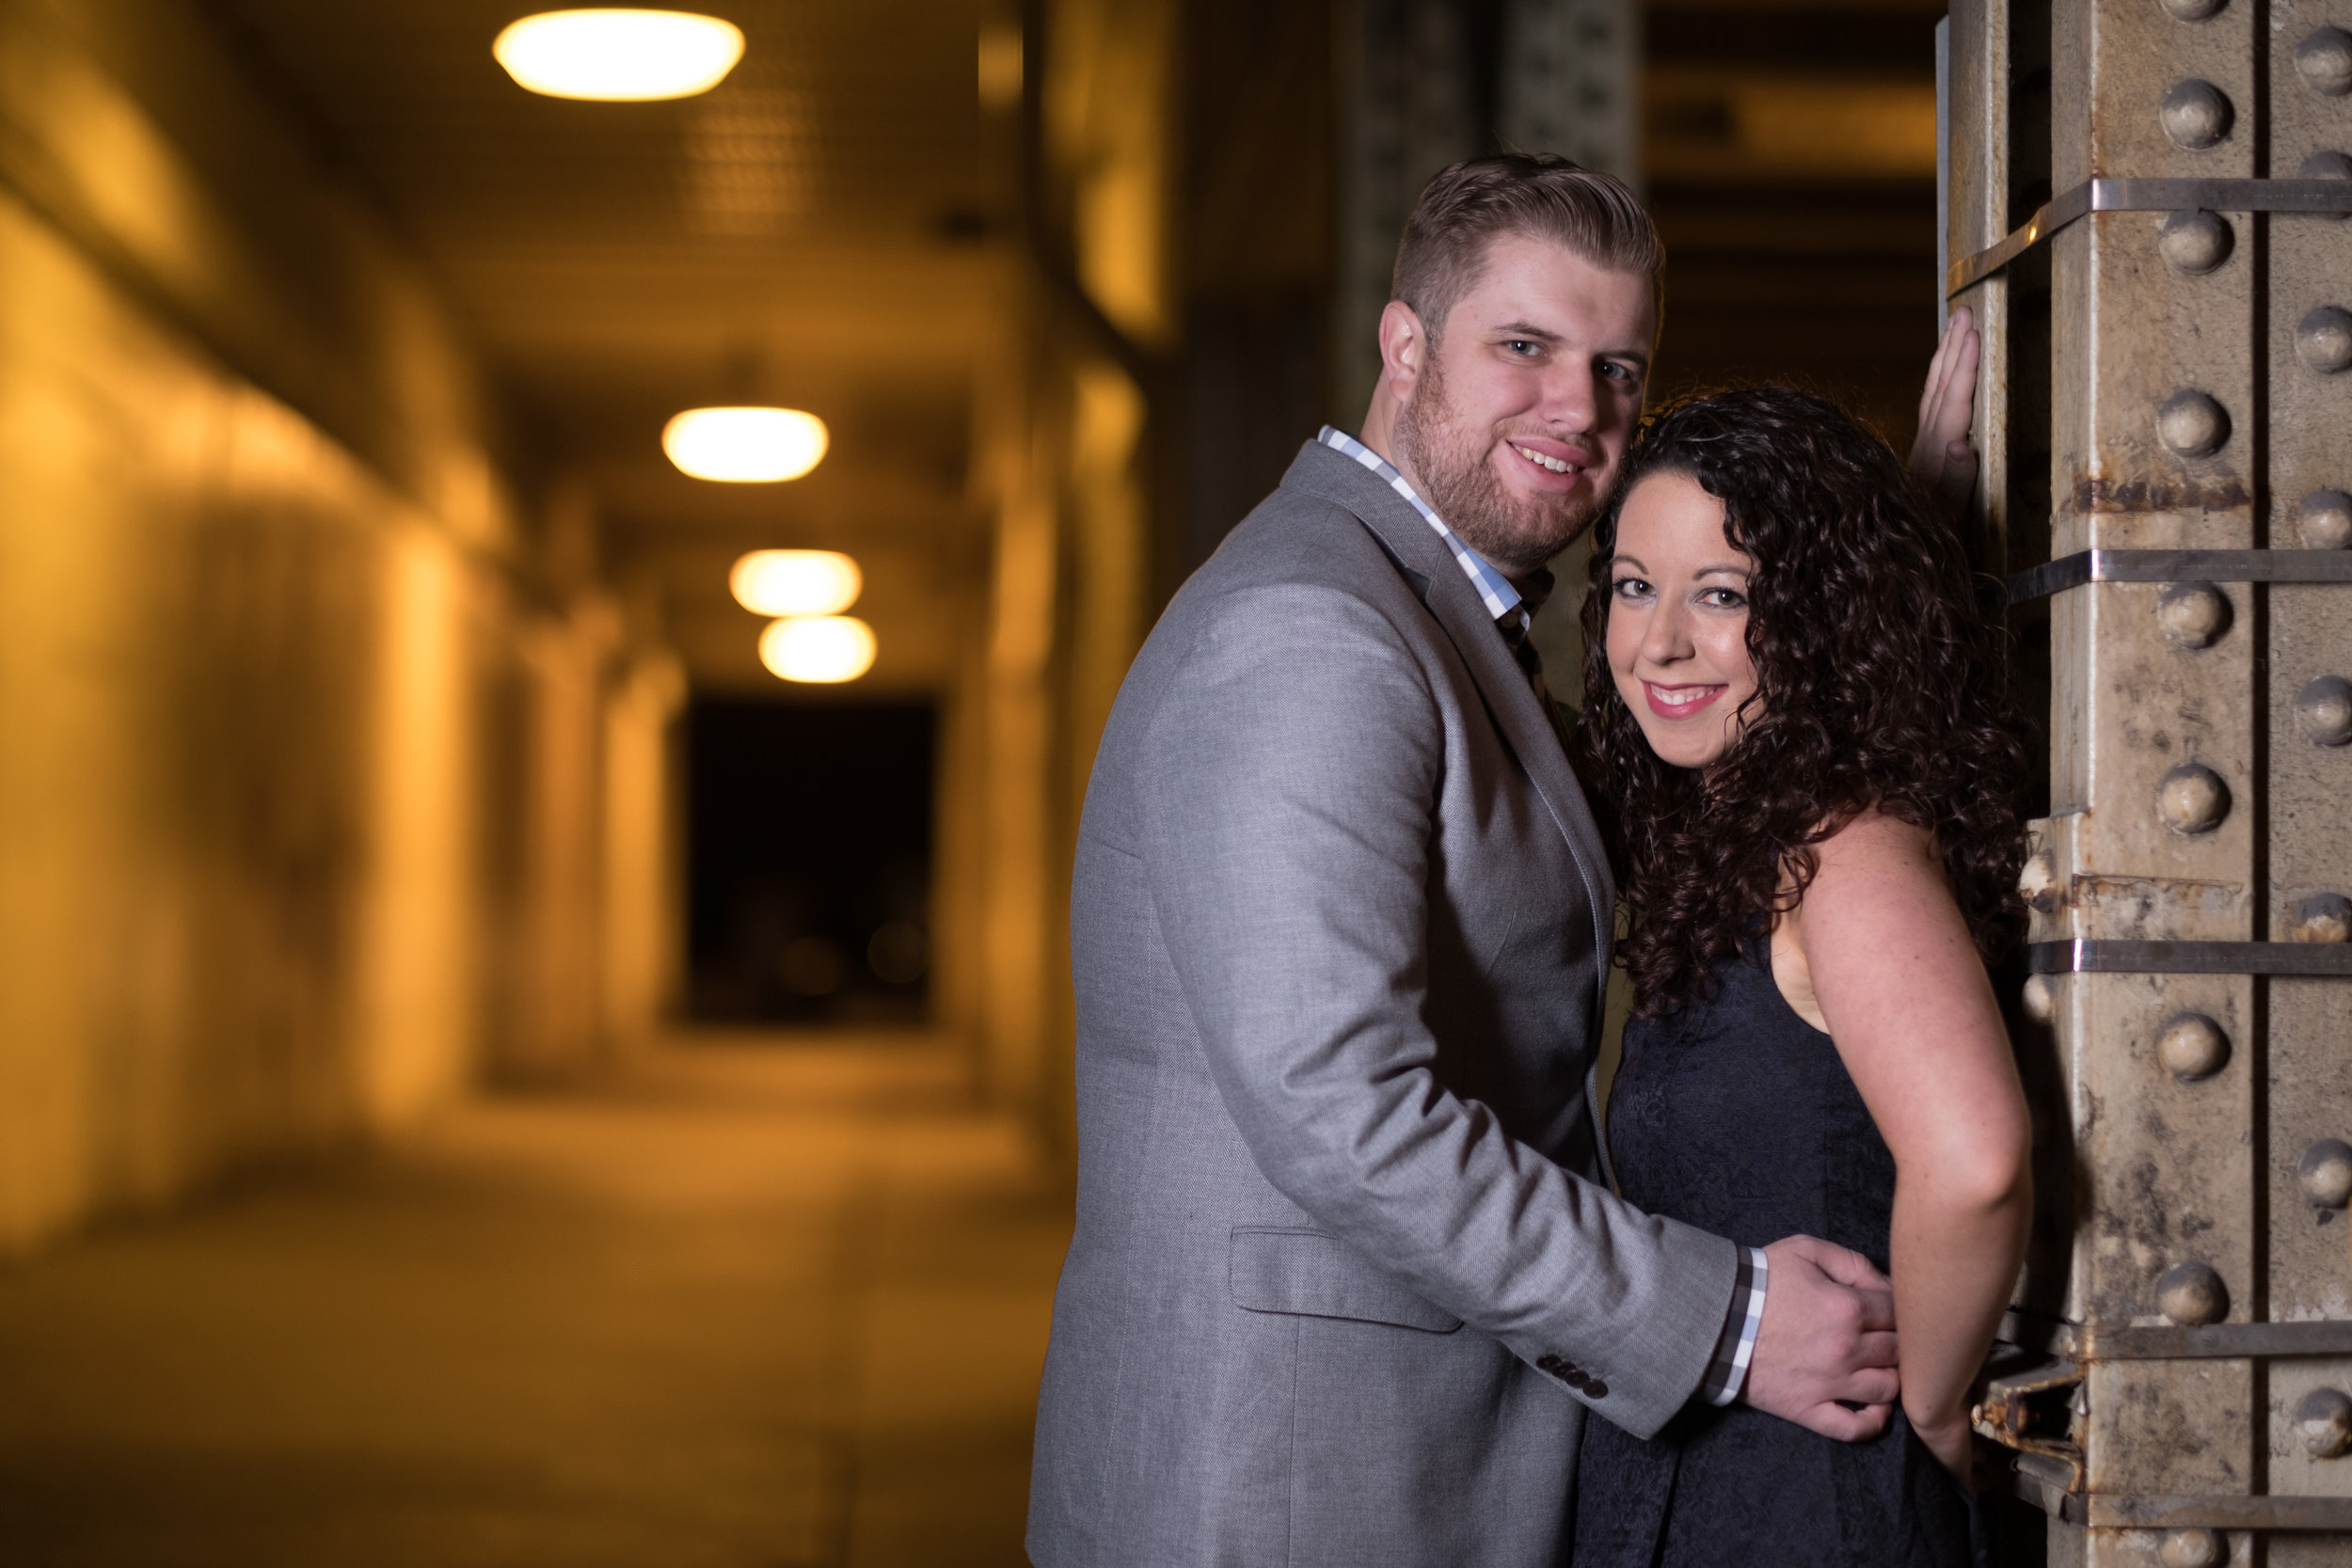 Downtown-Indianapolis-night-engagement-pictures-11.jpg